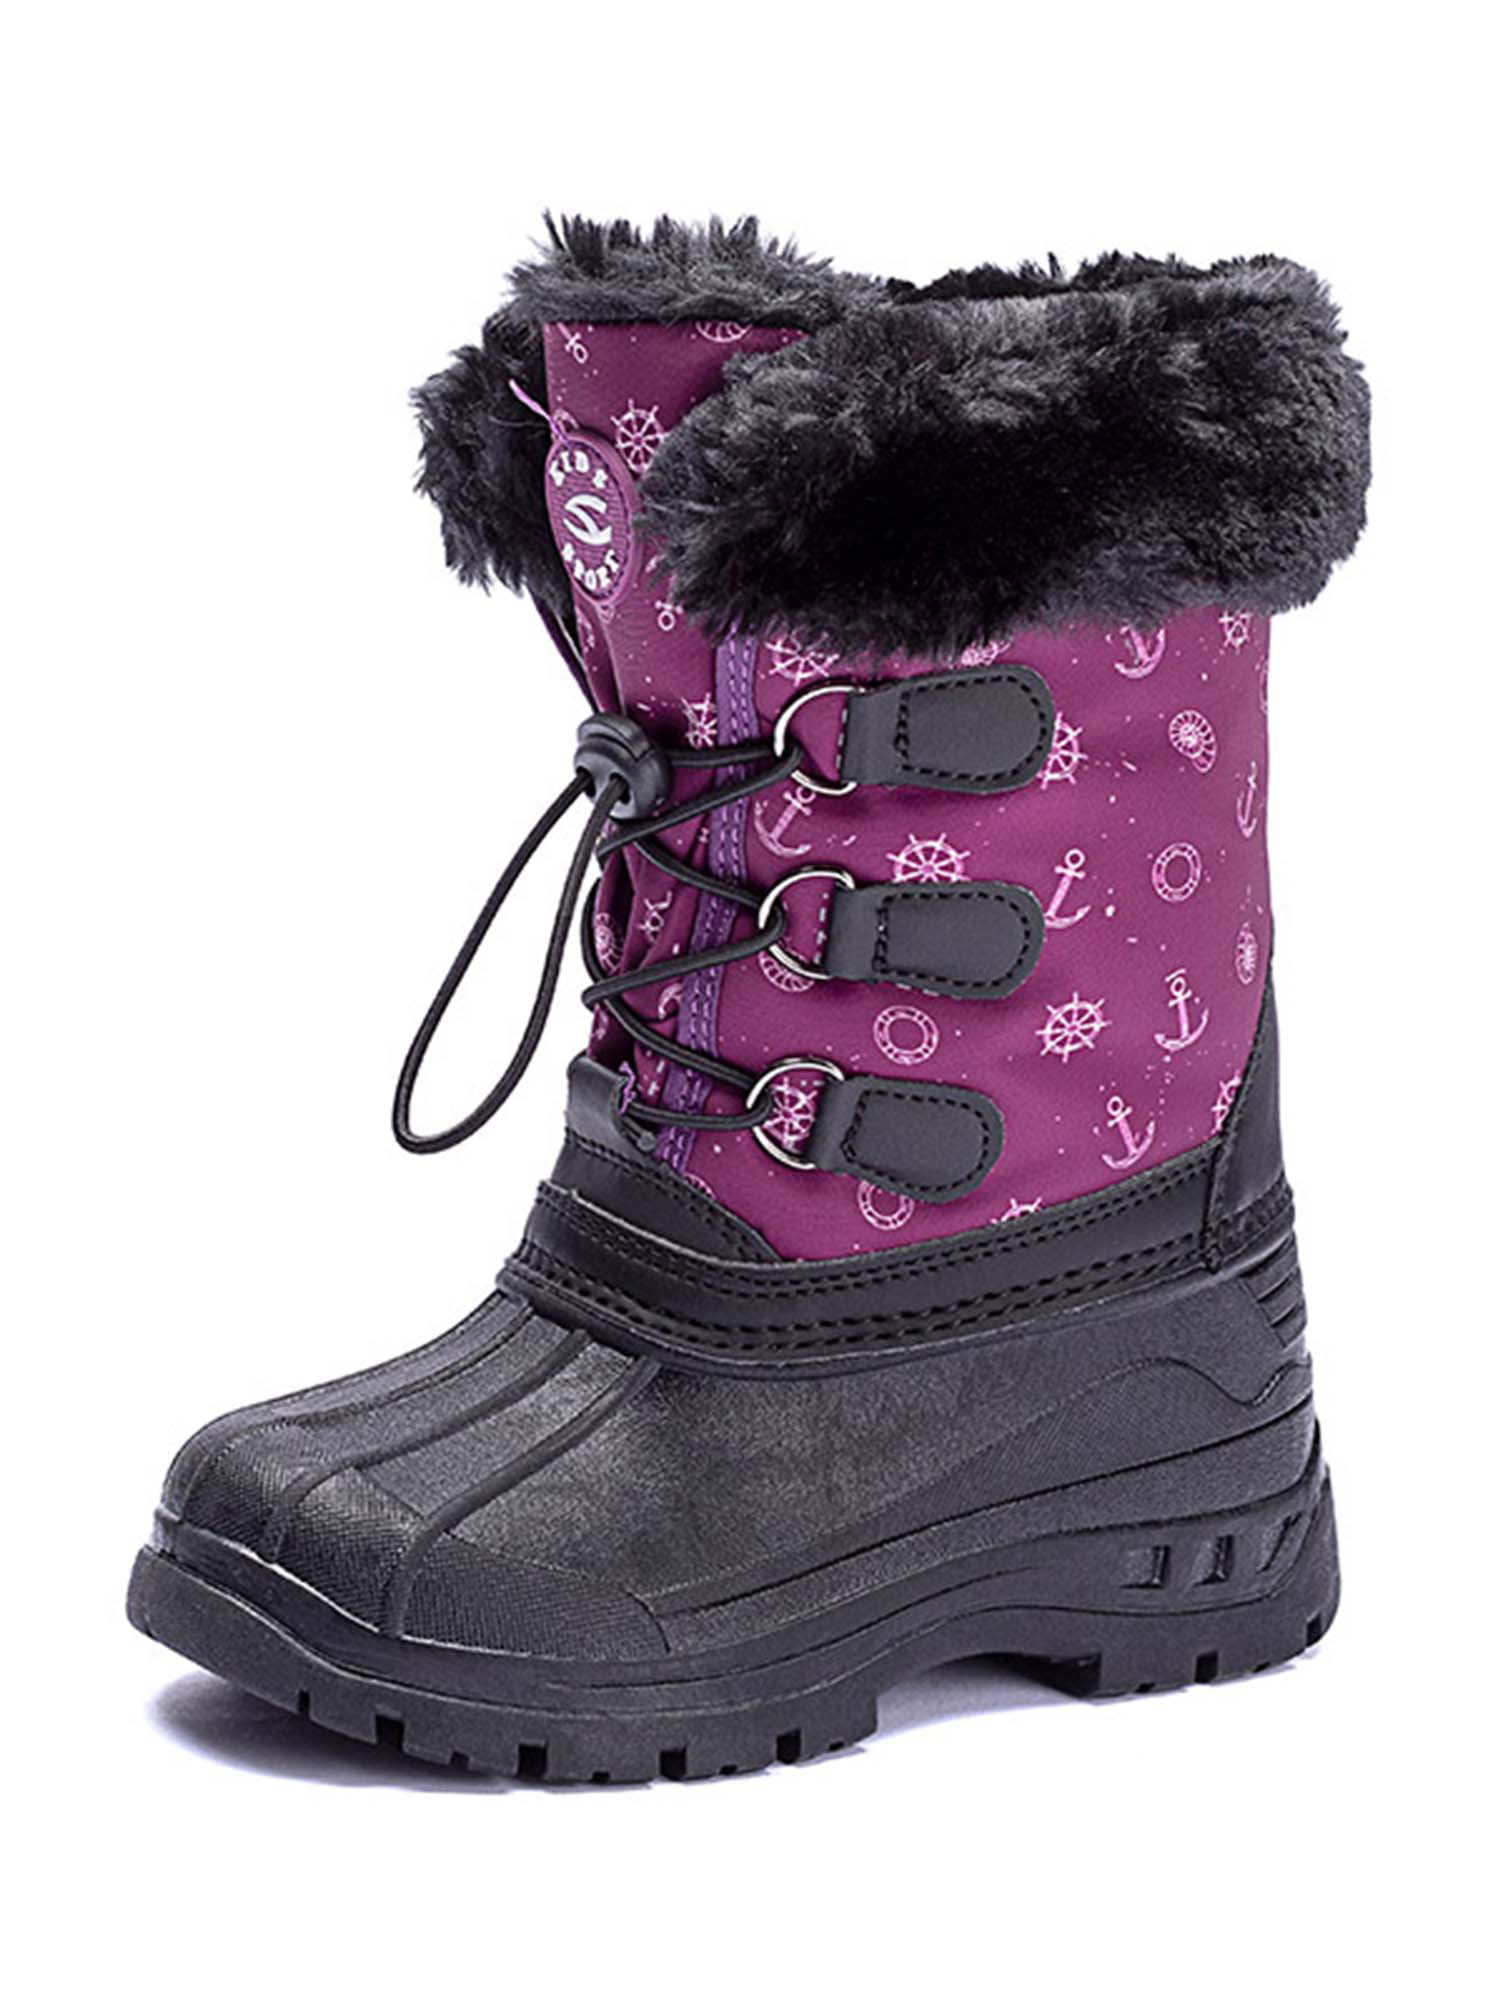 Kids Snow Boots for Boys Girls Toddler Winter Outdoor Boots Waterproof with Fur Lined Toddler/Little Kids/Big Kid